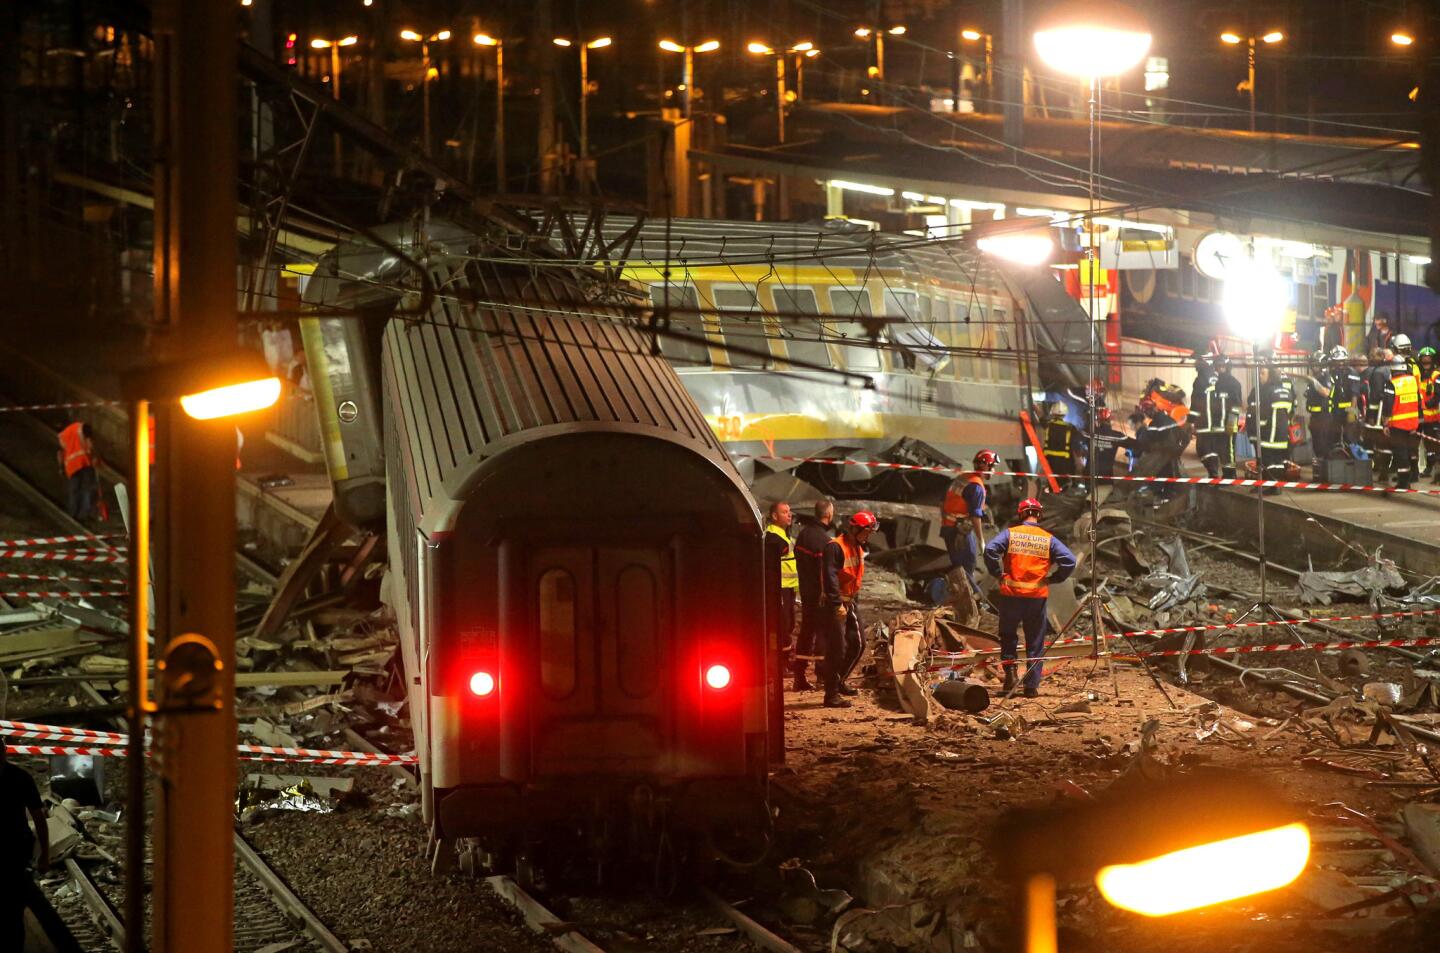 A derailed train car rests at the station in Bretigny-sur-Orge, 12 miles south of Paris. The packed passenger train skidded off its rails soon after leaving Paris, leaving at least six dead and dozens injured, authorities said.